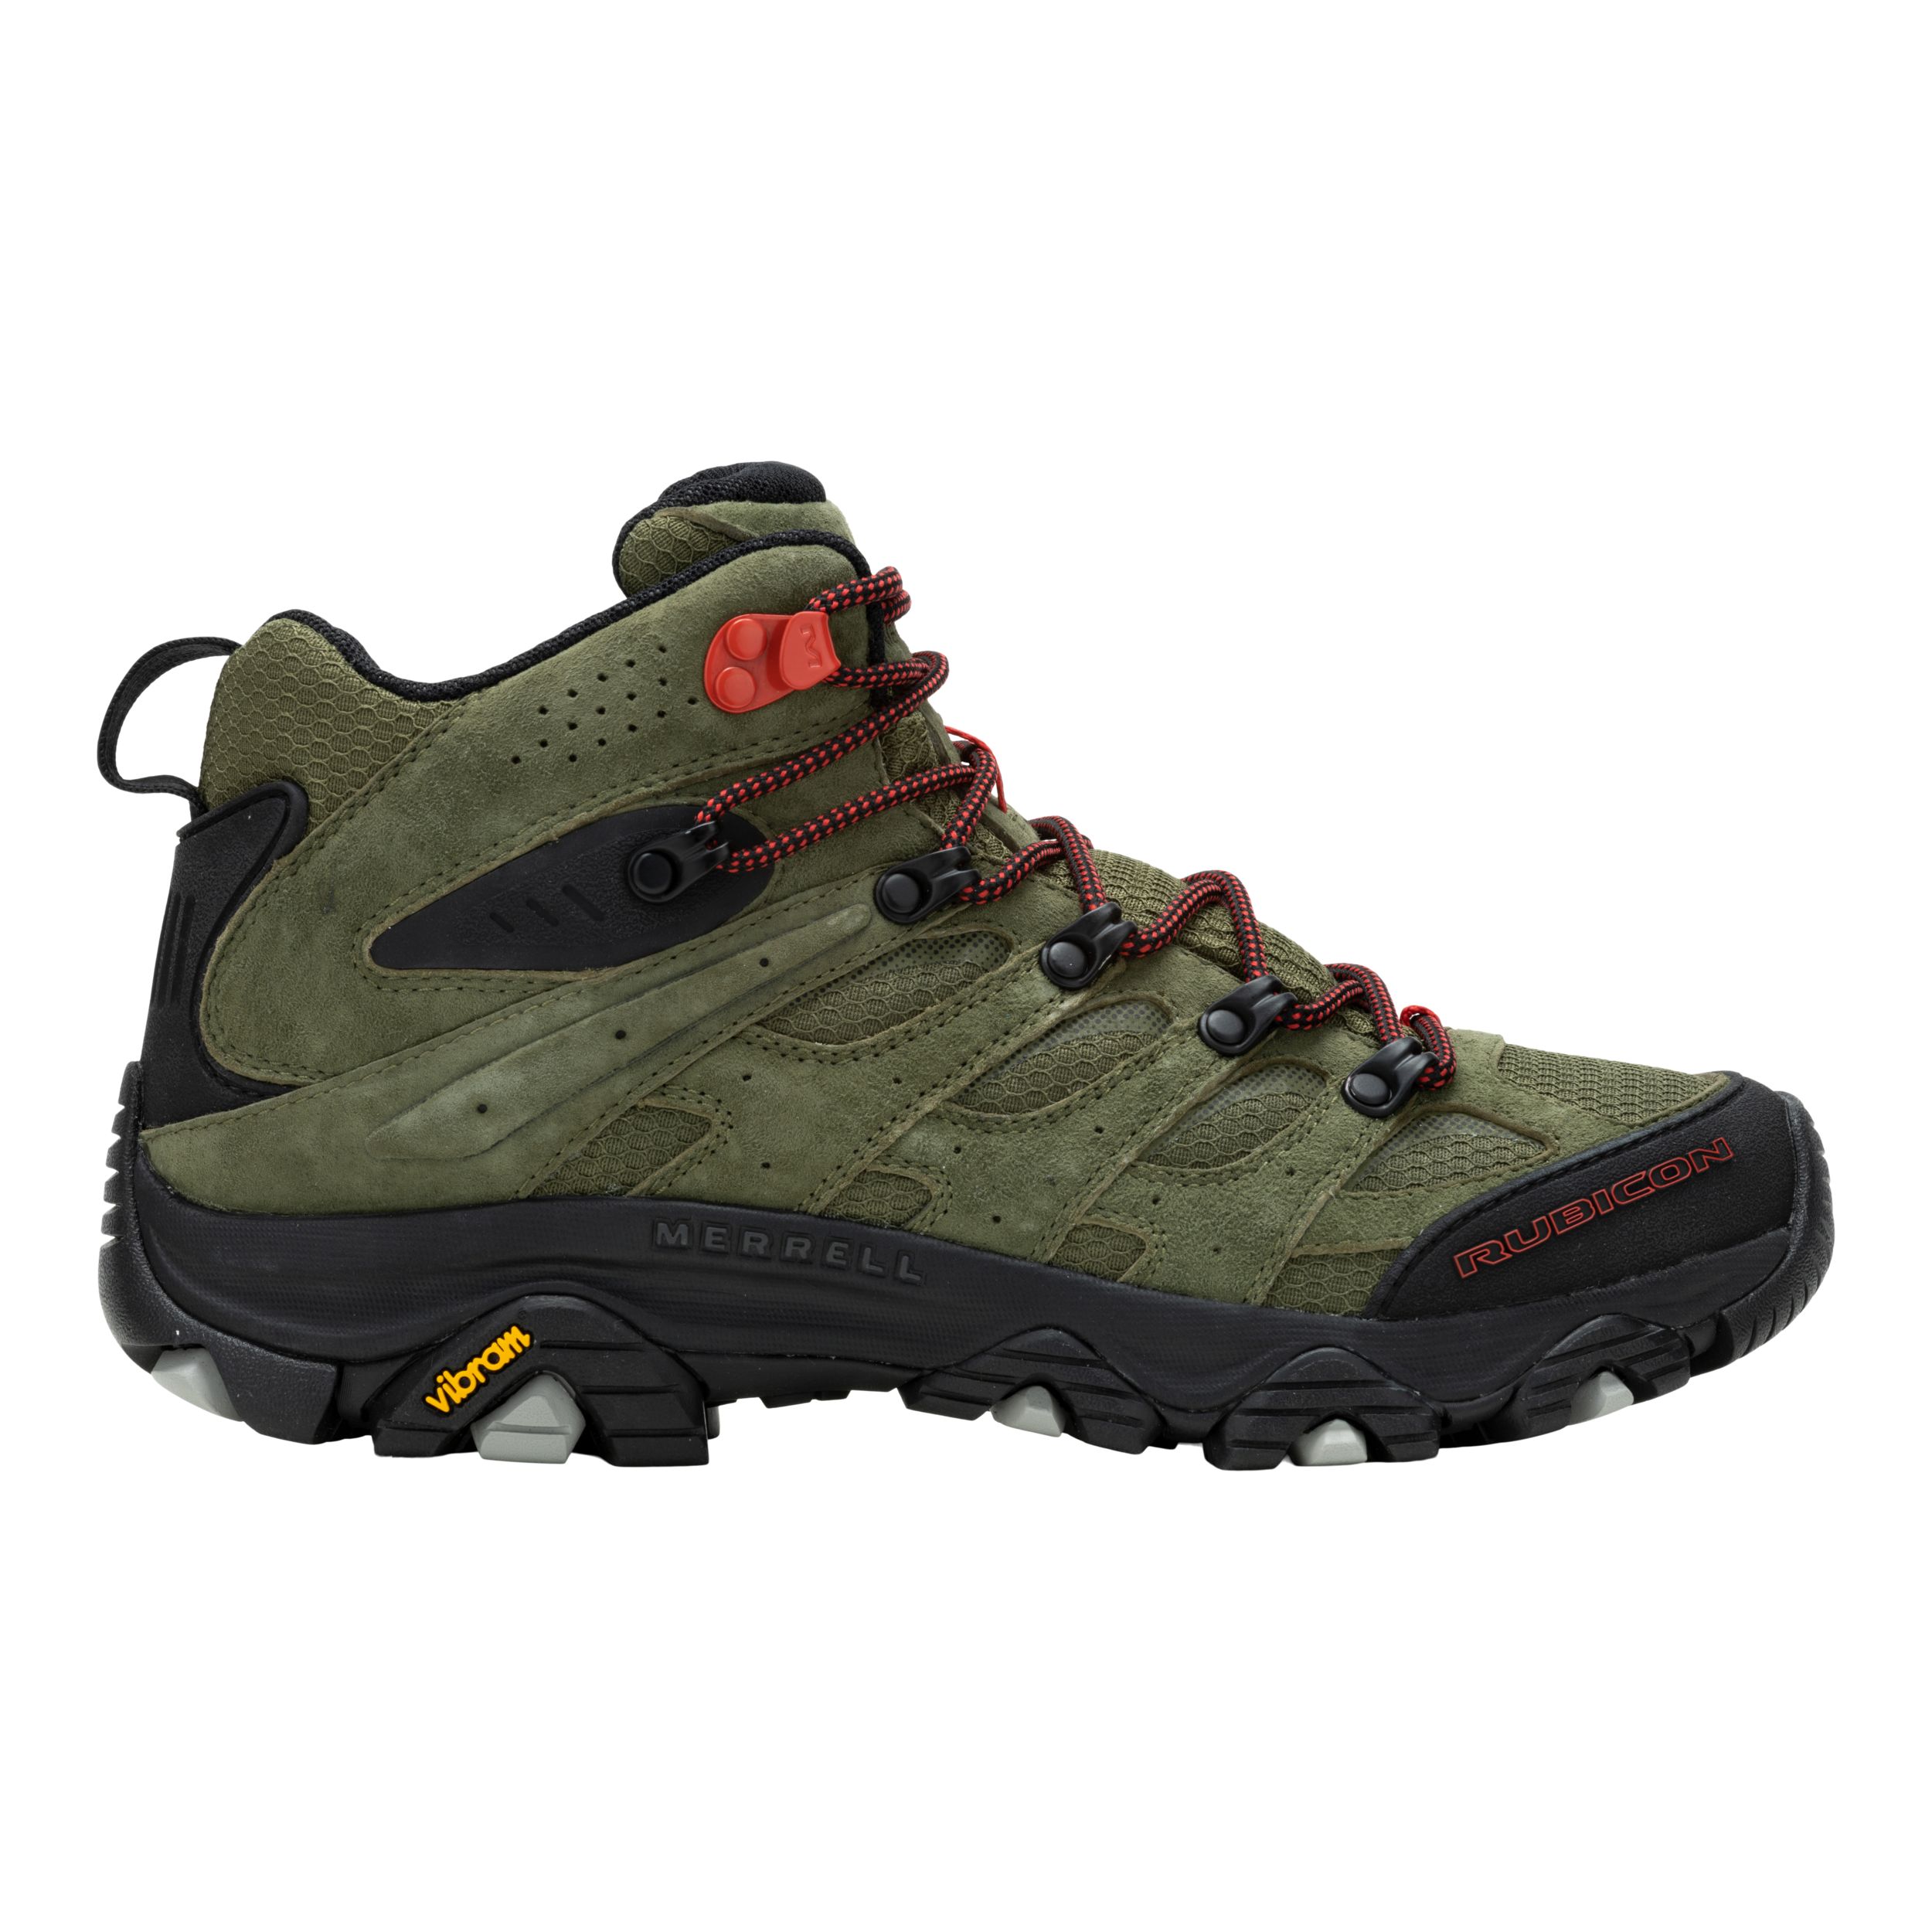 Image of Merrell X Jeep Men's Moab 3 Mid Waterproof Leather Hiking Shoes